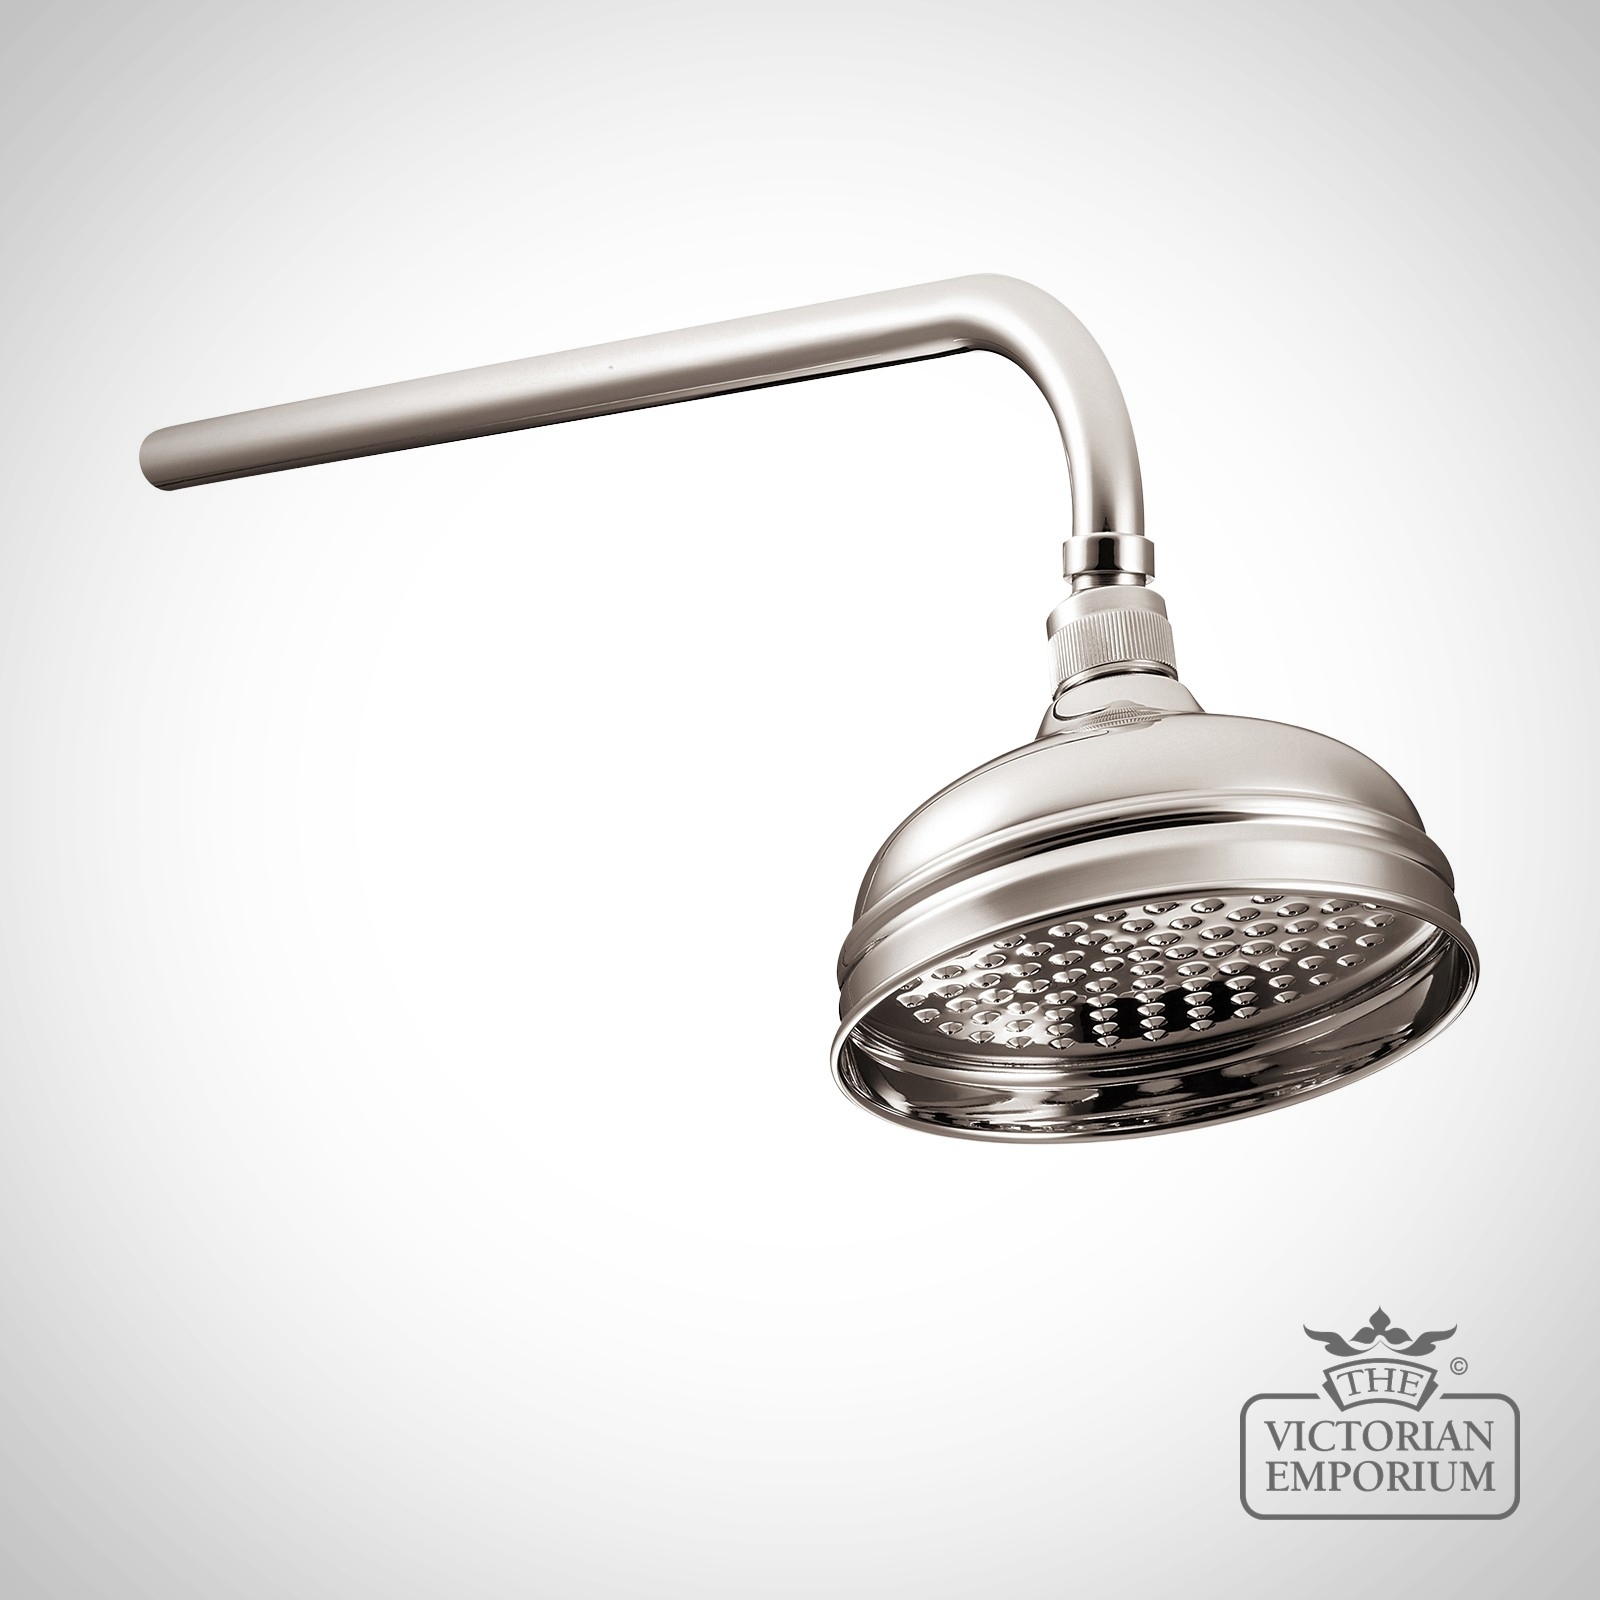 Shower Rose - 6”- in Chrome, Nickel or Copper